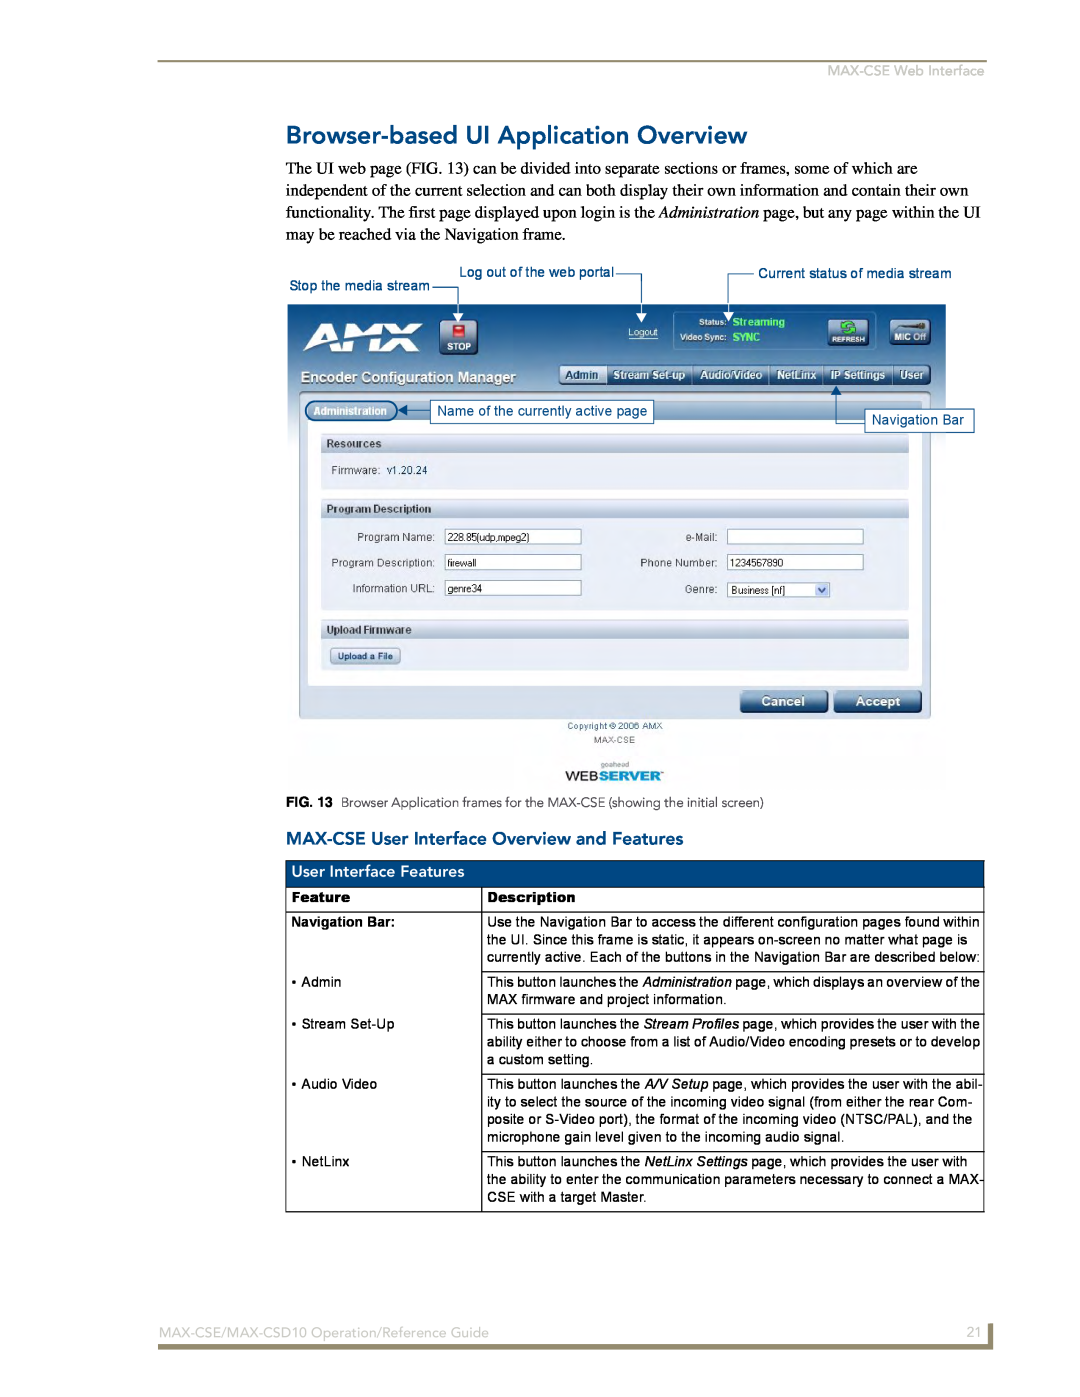 AMX MAX-CSD 10 Browser-basedUI Application Overview, MAX-CSEUser Interface Overview and Features, User Interface Features 